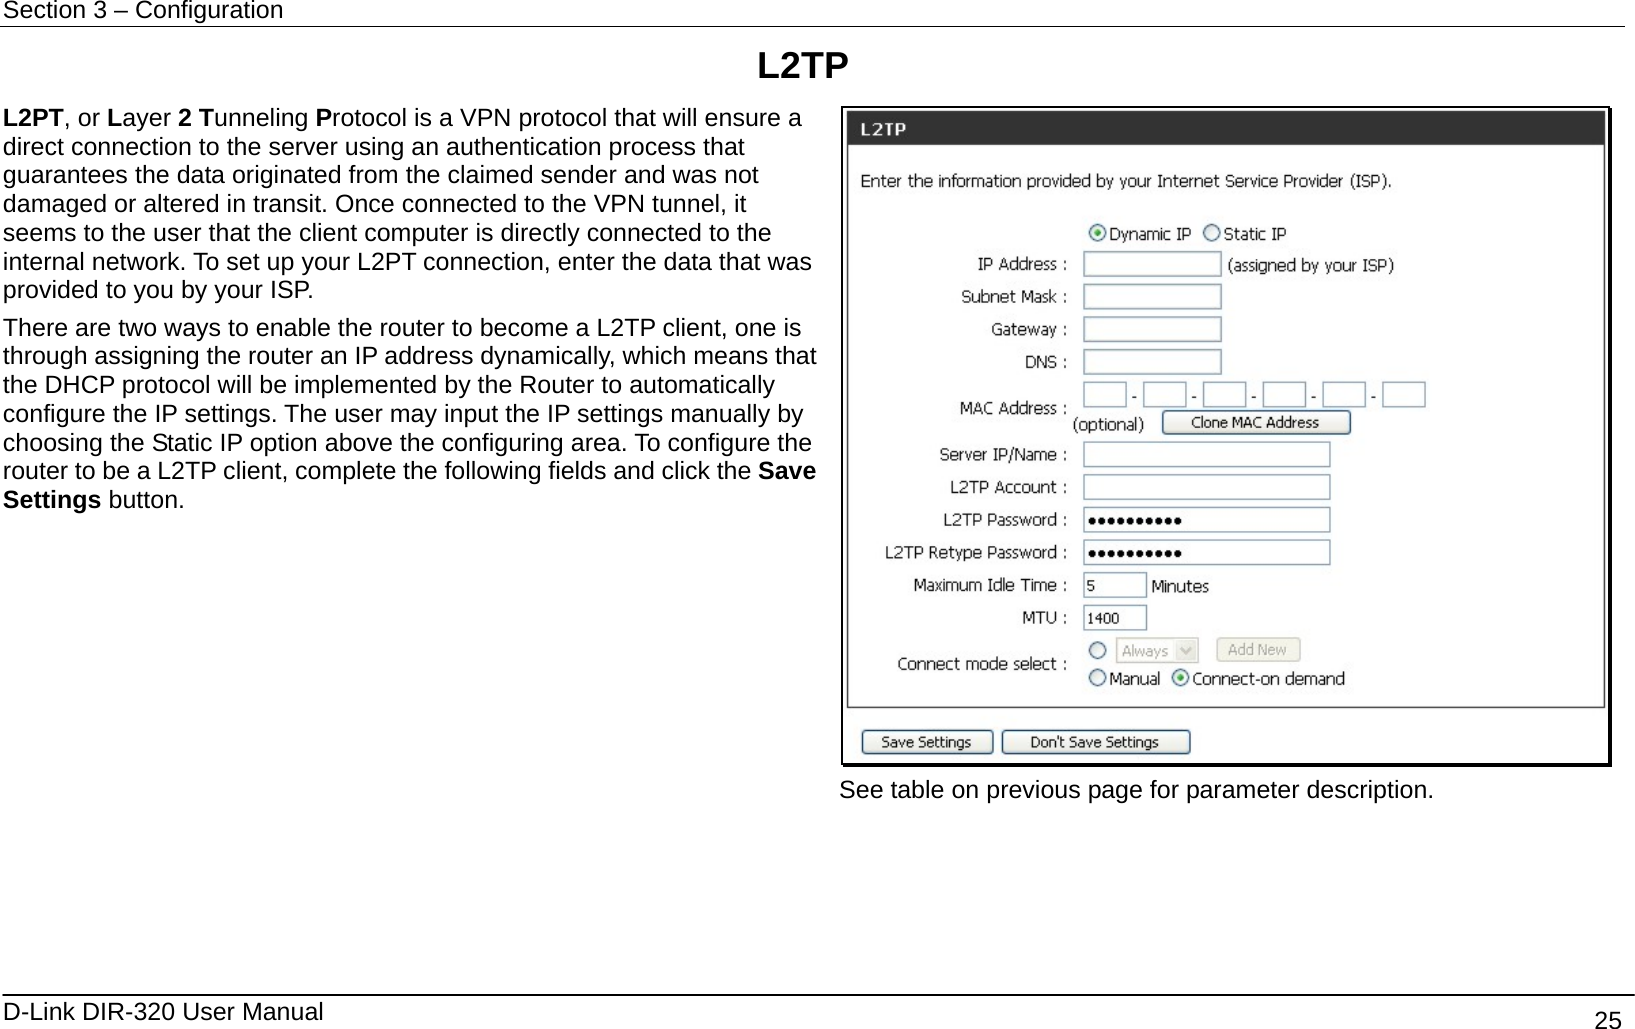 Section 3 – Configuration   D-Link DIR-320 User Manual                                       25 L2TP L2PT, or Layer 2 Tunneling Protocol is a VPN protocol that will ensure a direct connection to the server using an authentication process that guarantees the data originated from the claimed sender and was not damaged or altered in transit. Once connected to the VPN tunnel, it seems to the user that the client computer is directly connected to the internal network. To set up your L2PT connection, enter the data that was provided to you by your ISP. There are two ways to enable the router to become a L2TP client, one is through assigning the router an IP address dynamically, which means that the DHCP protocol will be implemented by the Router to automatically configure the IP settings. The user may input the IP settings manually by choosing the Static IP option above the configuring area. To configure the router to be a L2TP client, complete the following fields and click the Save Settings button.  See table on previous page for parameter description.  